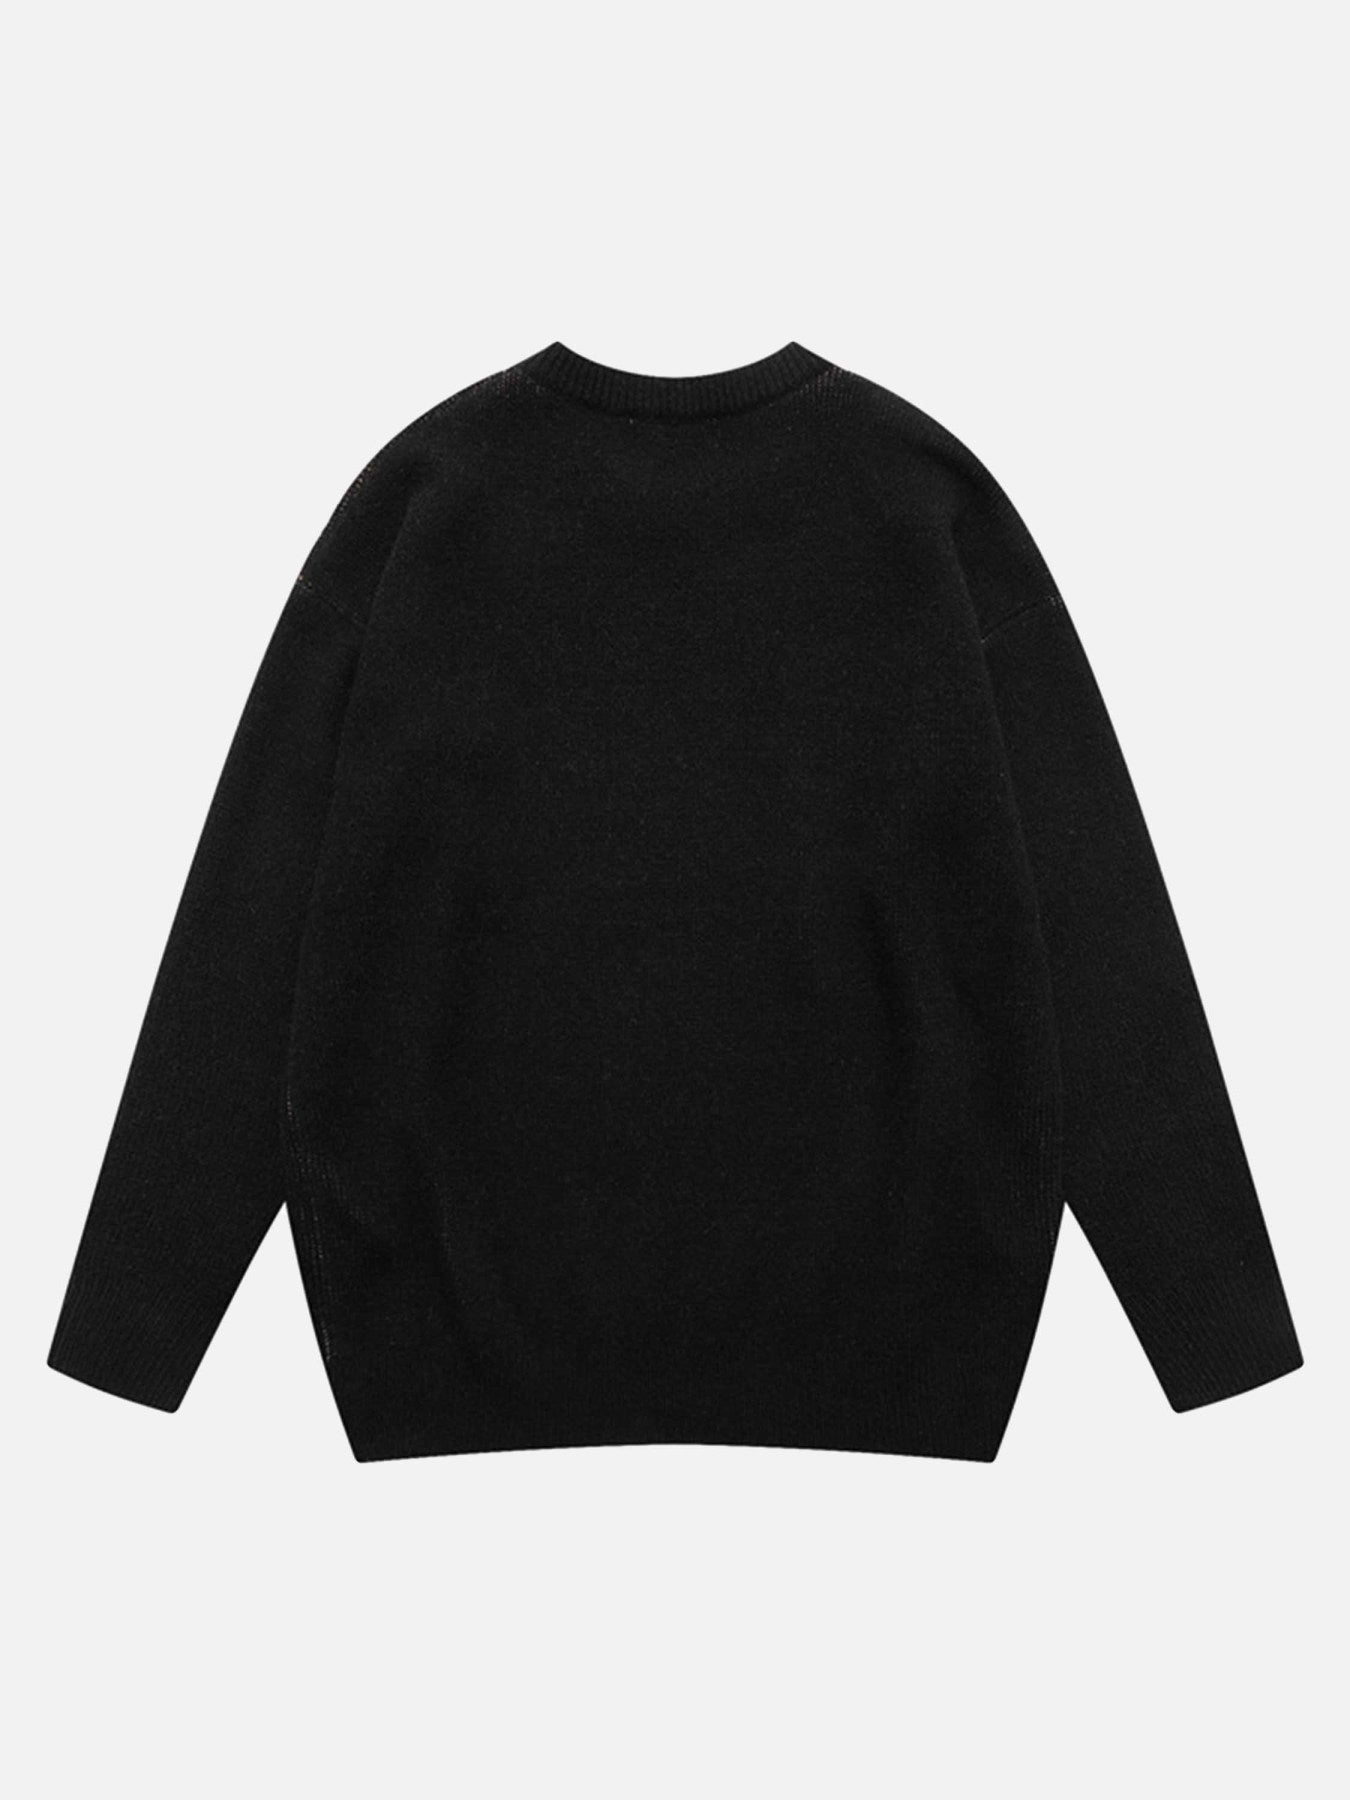 Thesupermade Street Vintage Character Knit Sweater